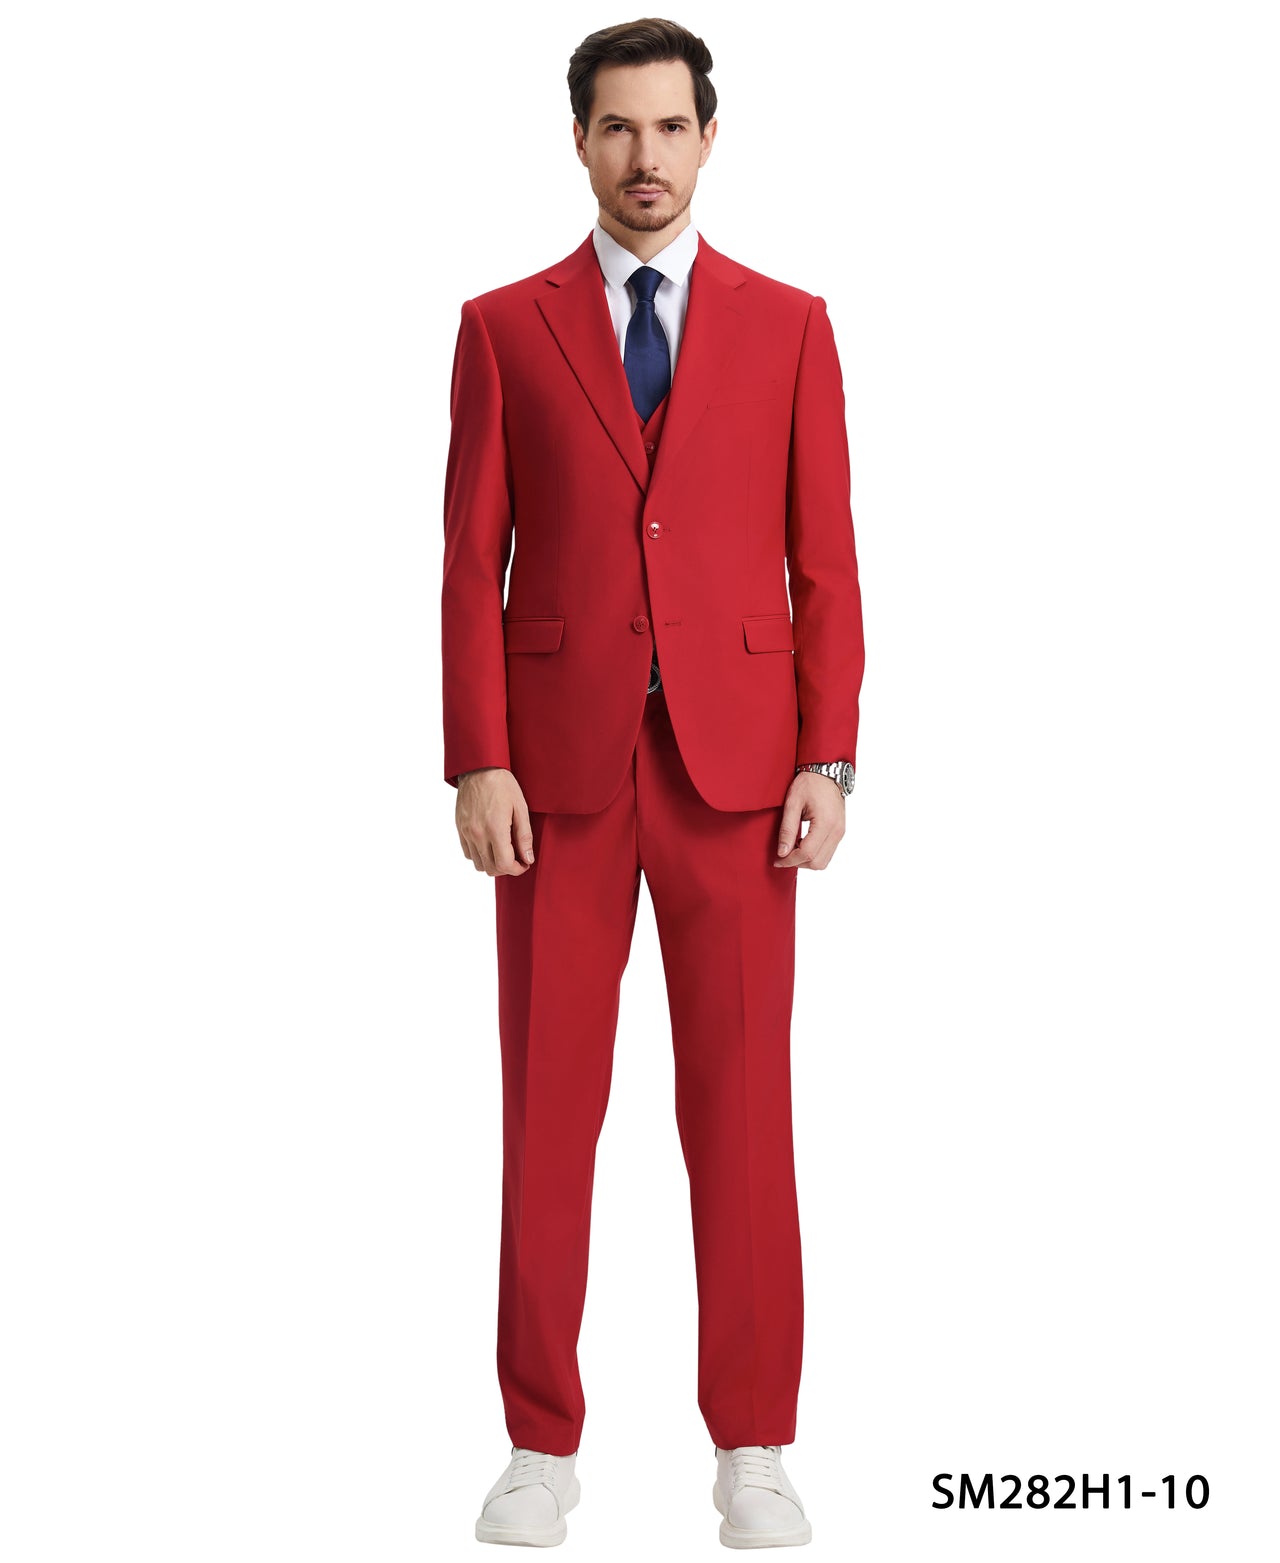 Stacy Adams 3 PC Red Solid Mens Suit - Hattitude